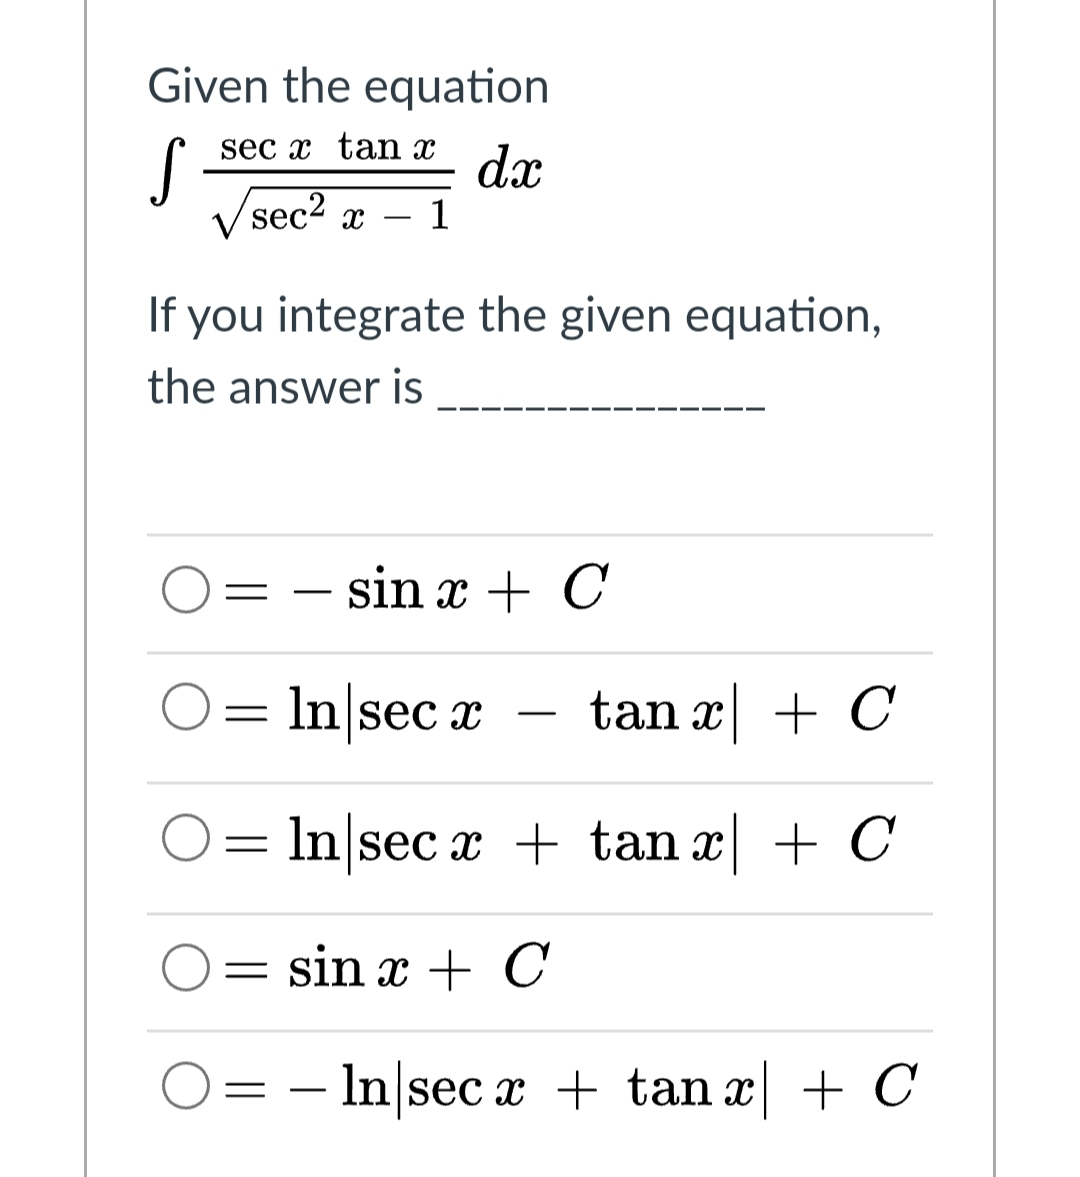 Given the equation
sec x tan x
S
sec2 x
dx
- 1
|
If you integrate the given equation,
the answer is
sin x + C
-
In\sec x
tan x + C
-
= In sec x + tan x| + C
sin x + C
O= - In|sec x + tan x| + C
